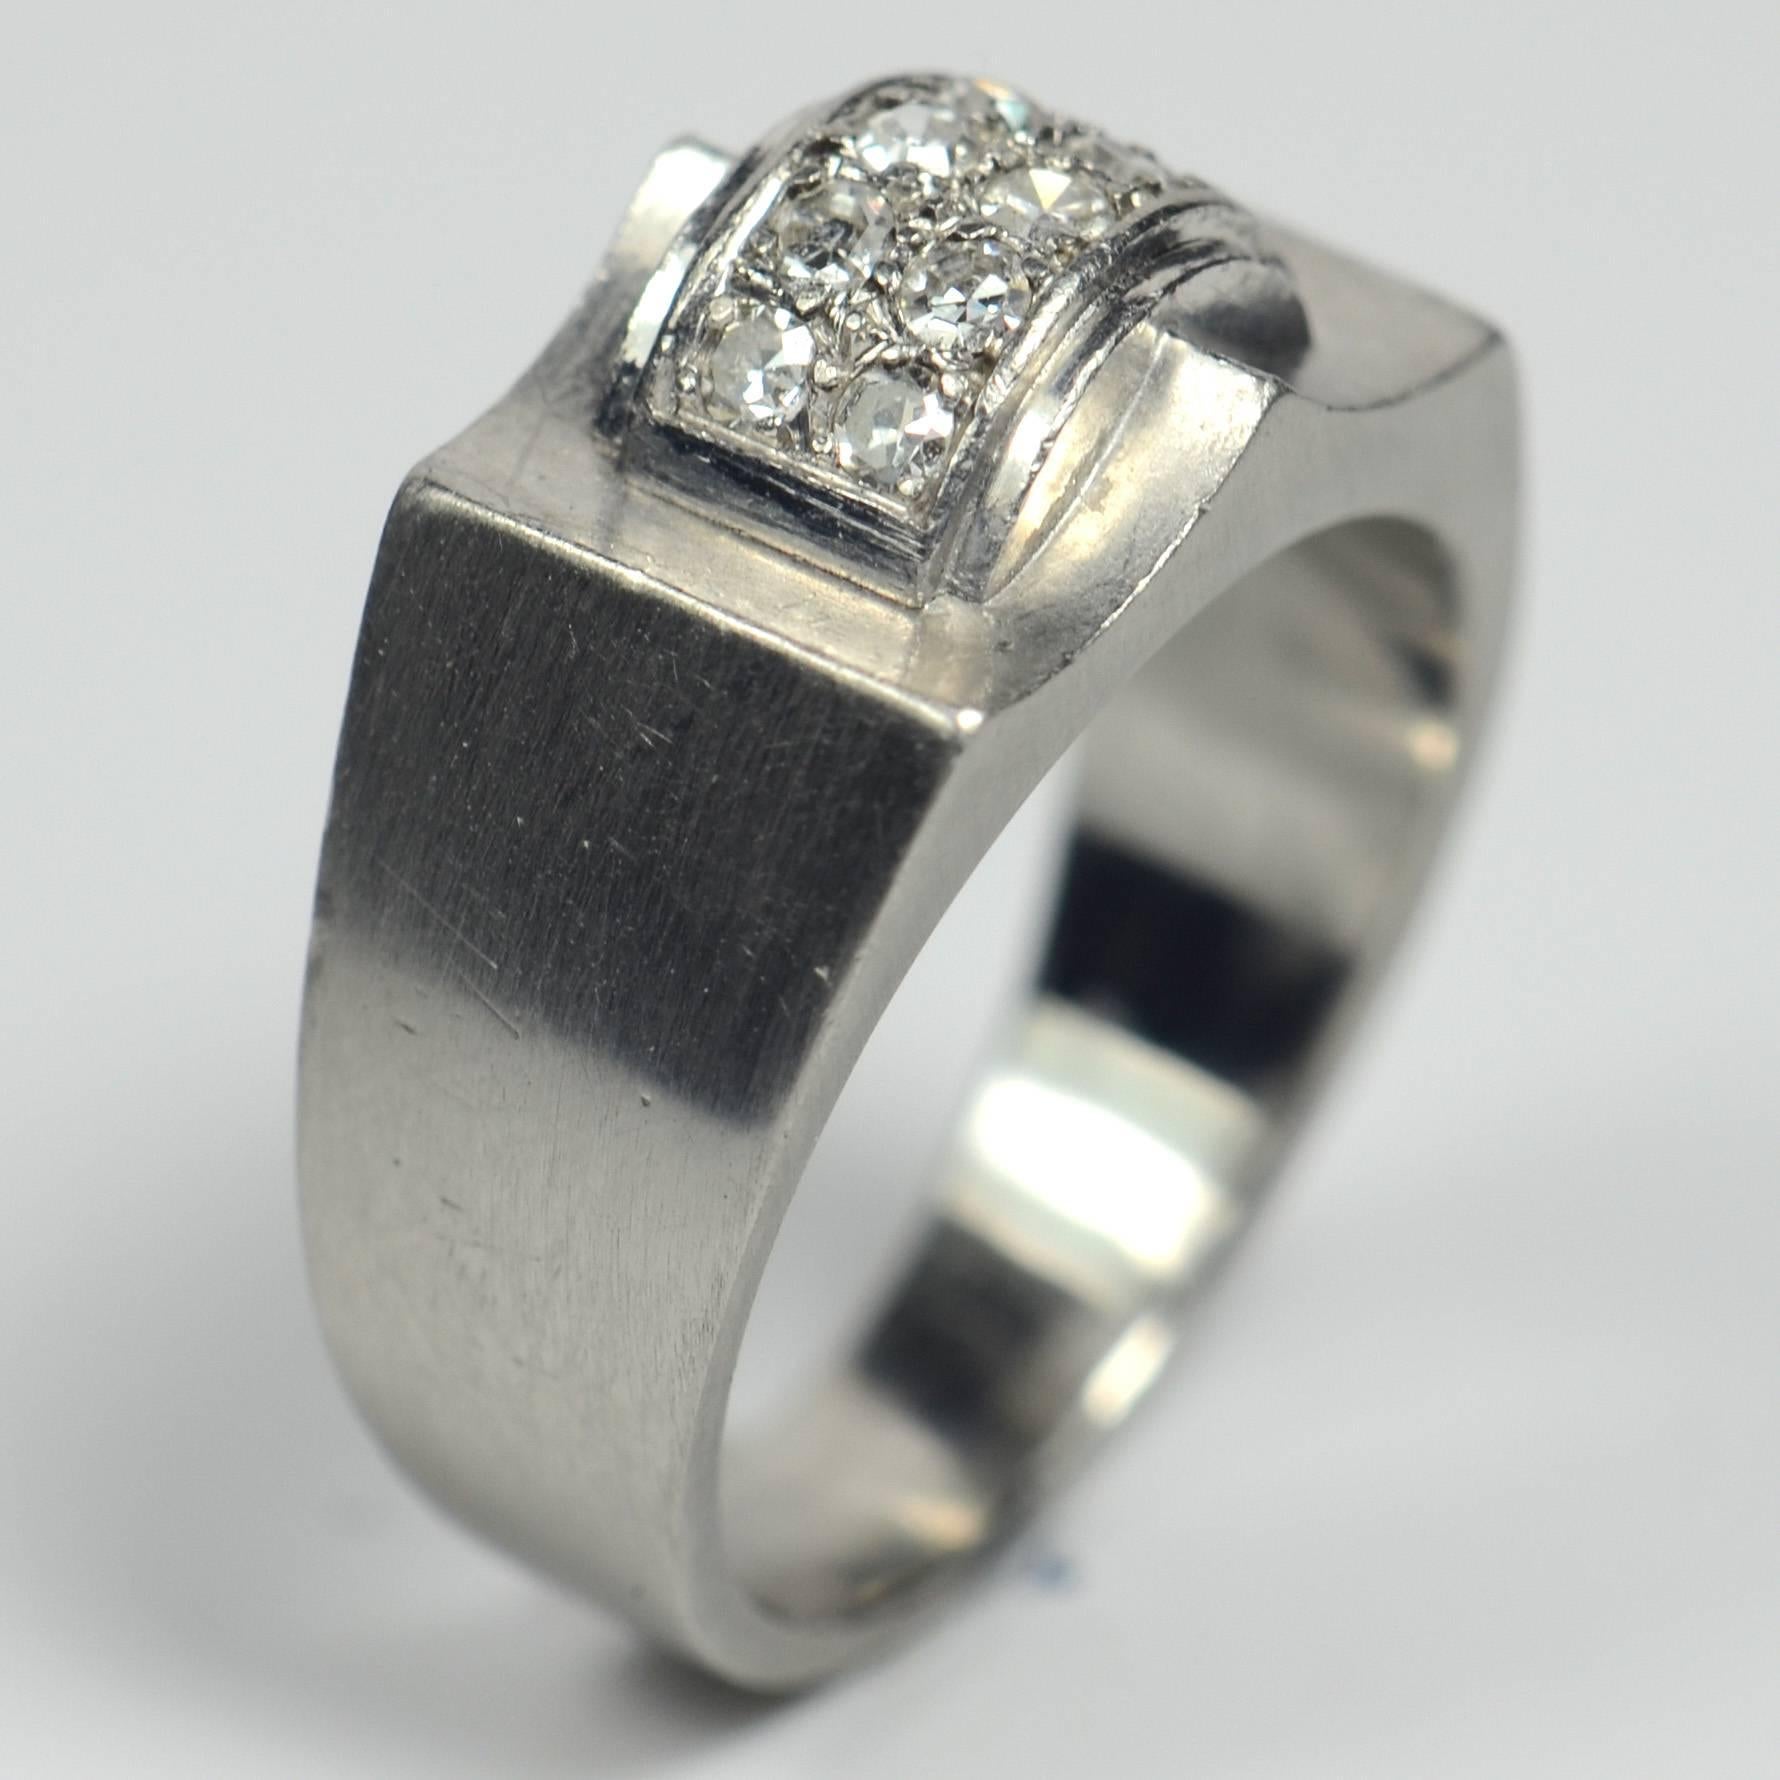 A Modernist French platinum and diamond ring with a stylish bridge form to a curved architectural motif, pave-set with 10 single-cut diamonds with a total weight of approximately 0.30 carats. The platinum has a brushed finish, giving a subtle gleam